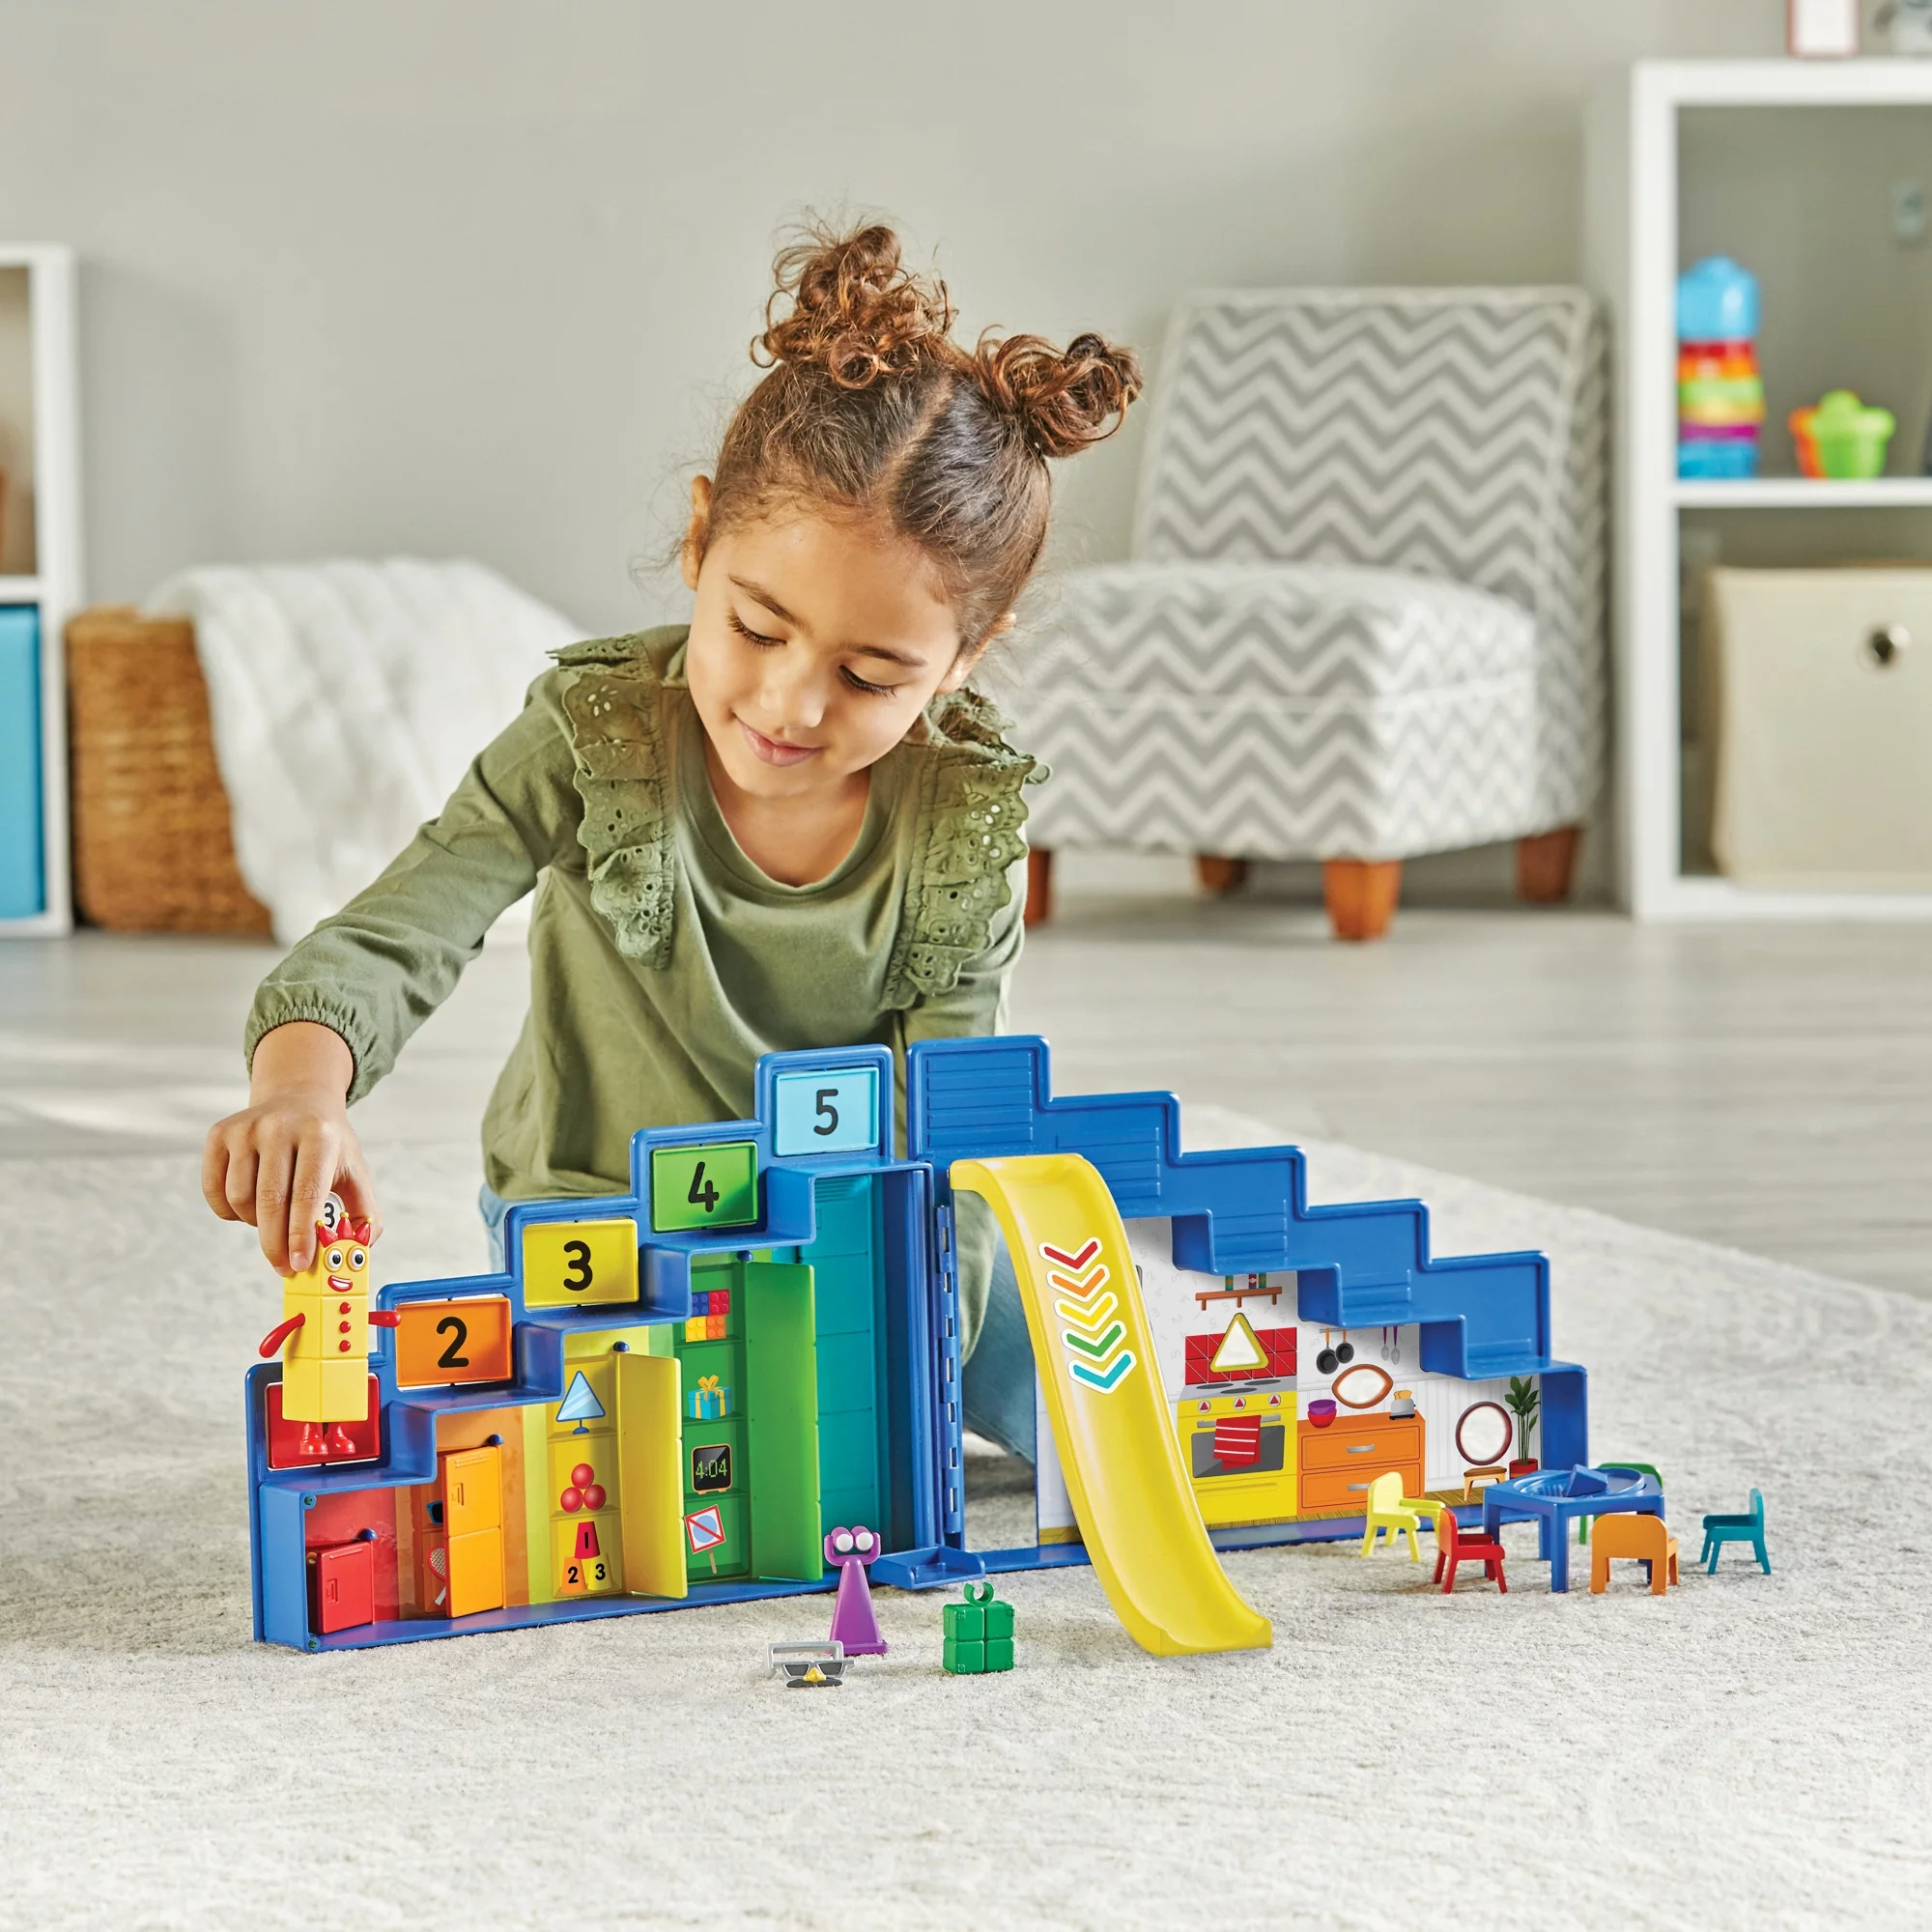 Child playing with colorful Step Squad toy set